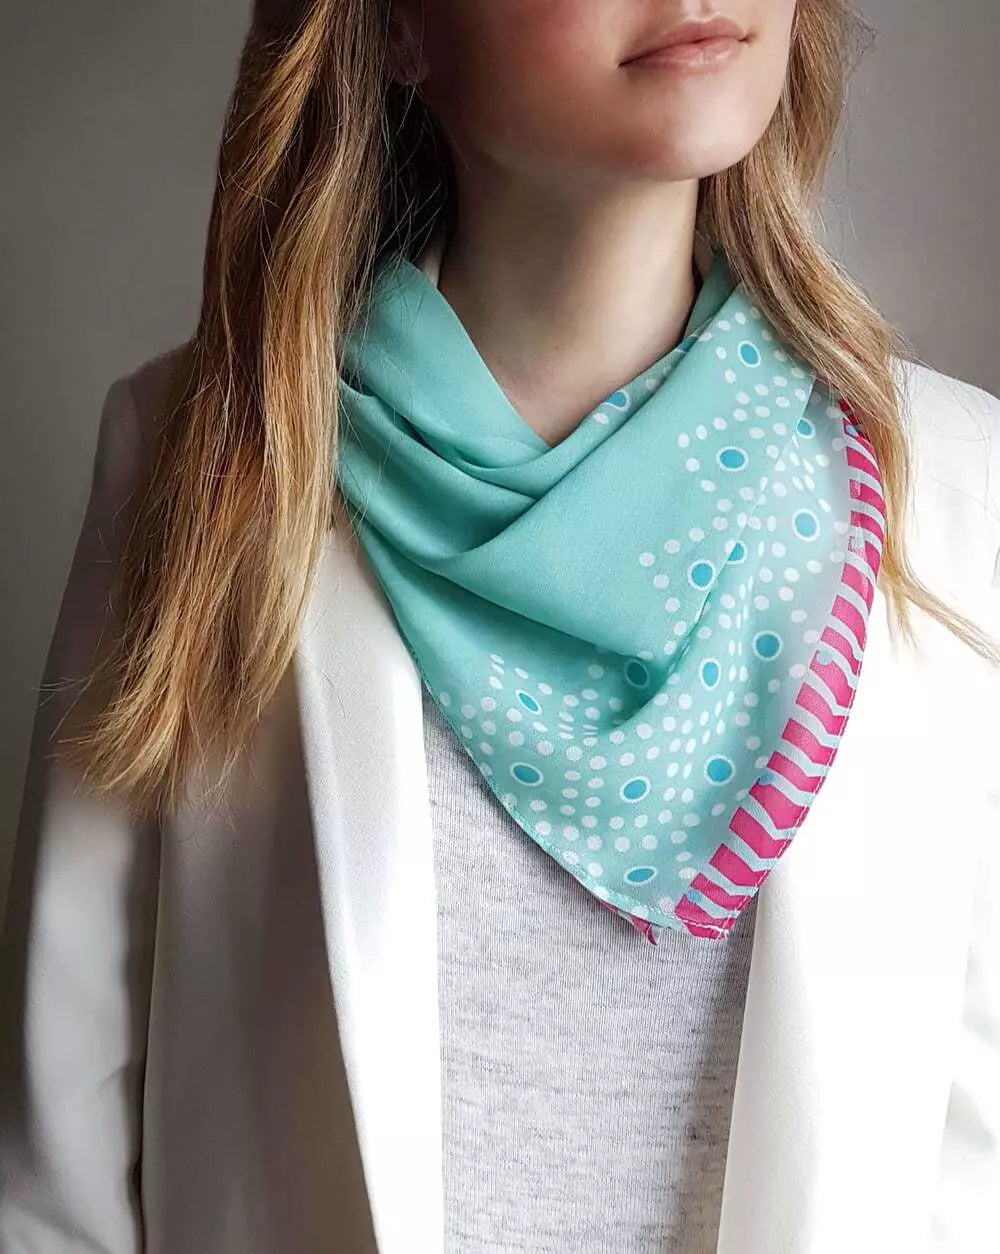 Scarf Forever is Boring Desert BL M, design printed in shades of blue.